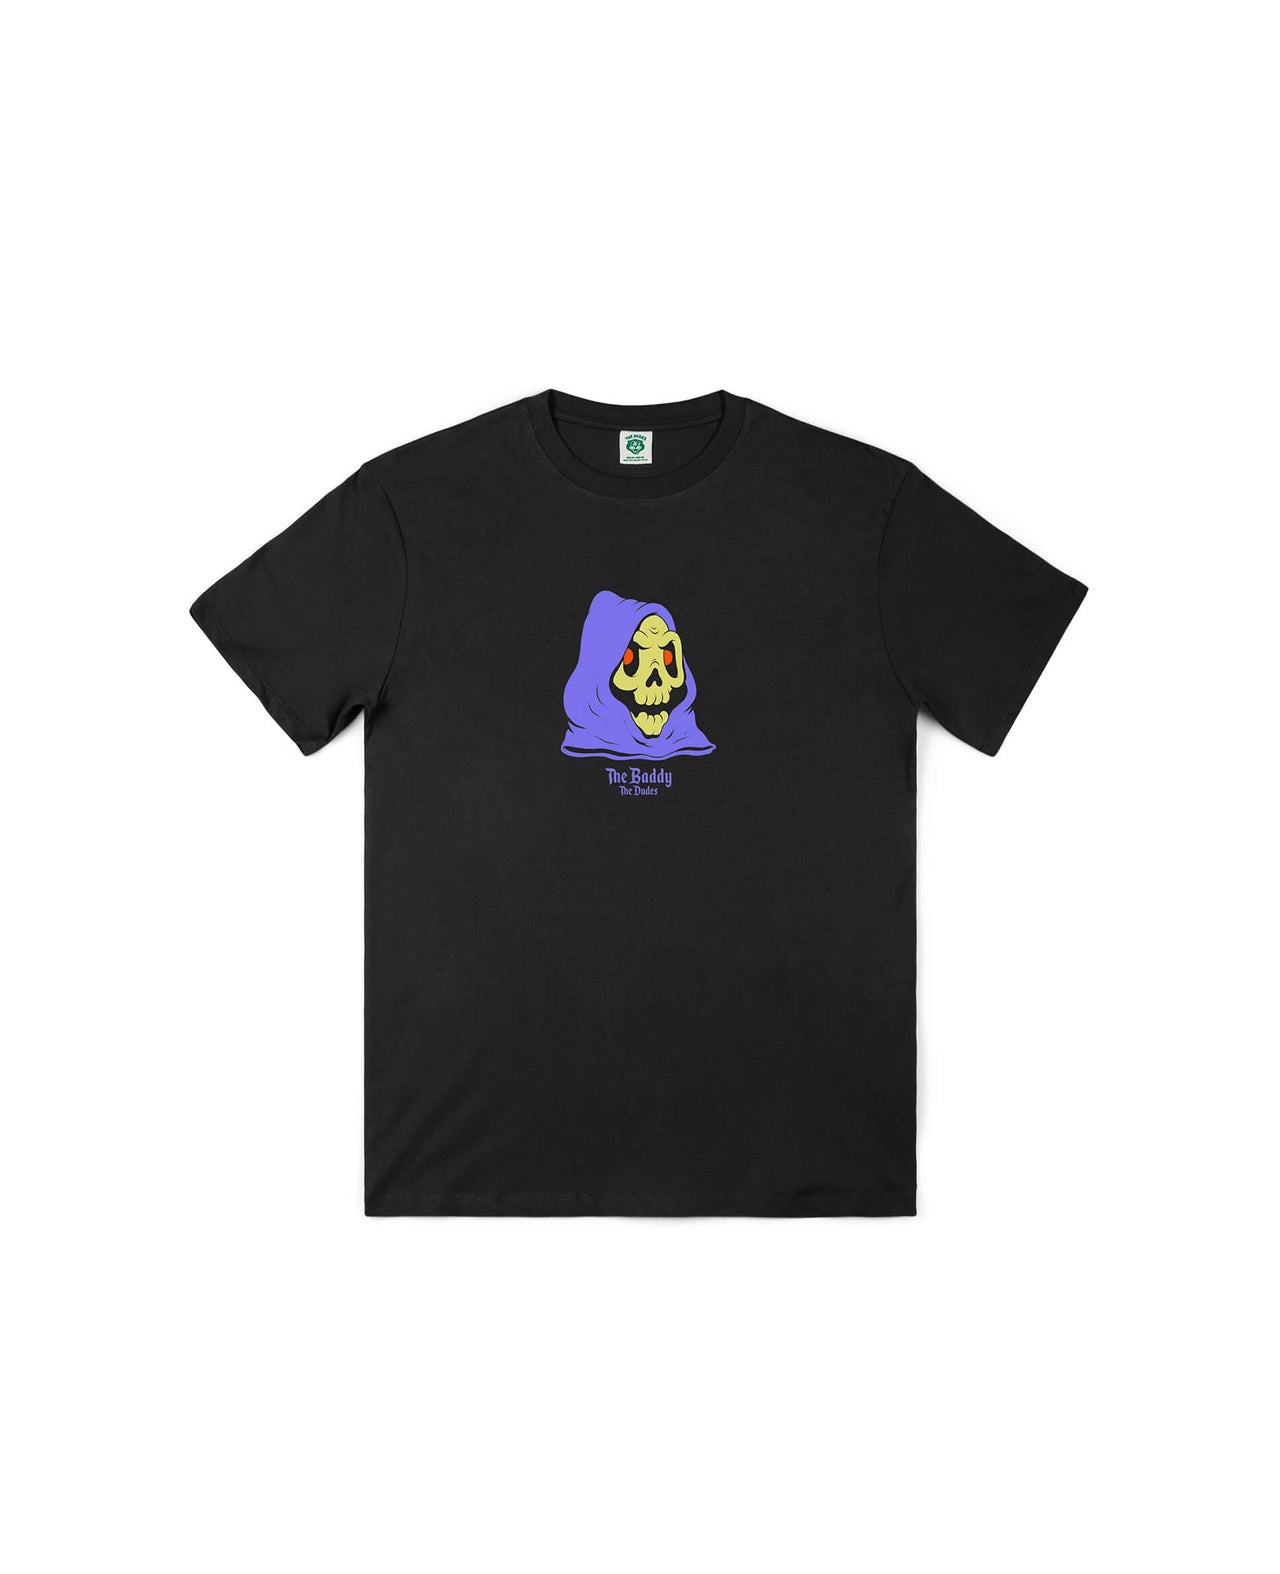 The Dudes The Baddy Tee